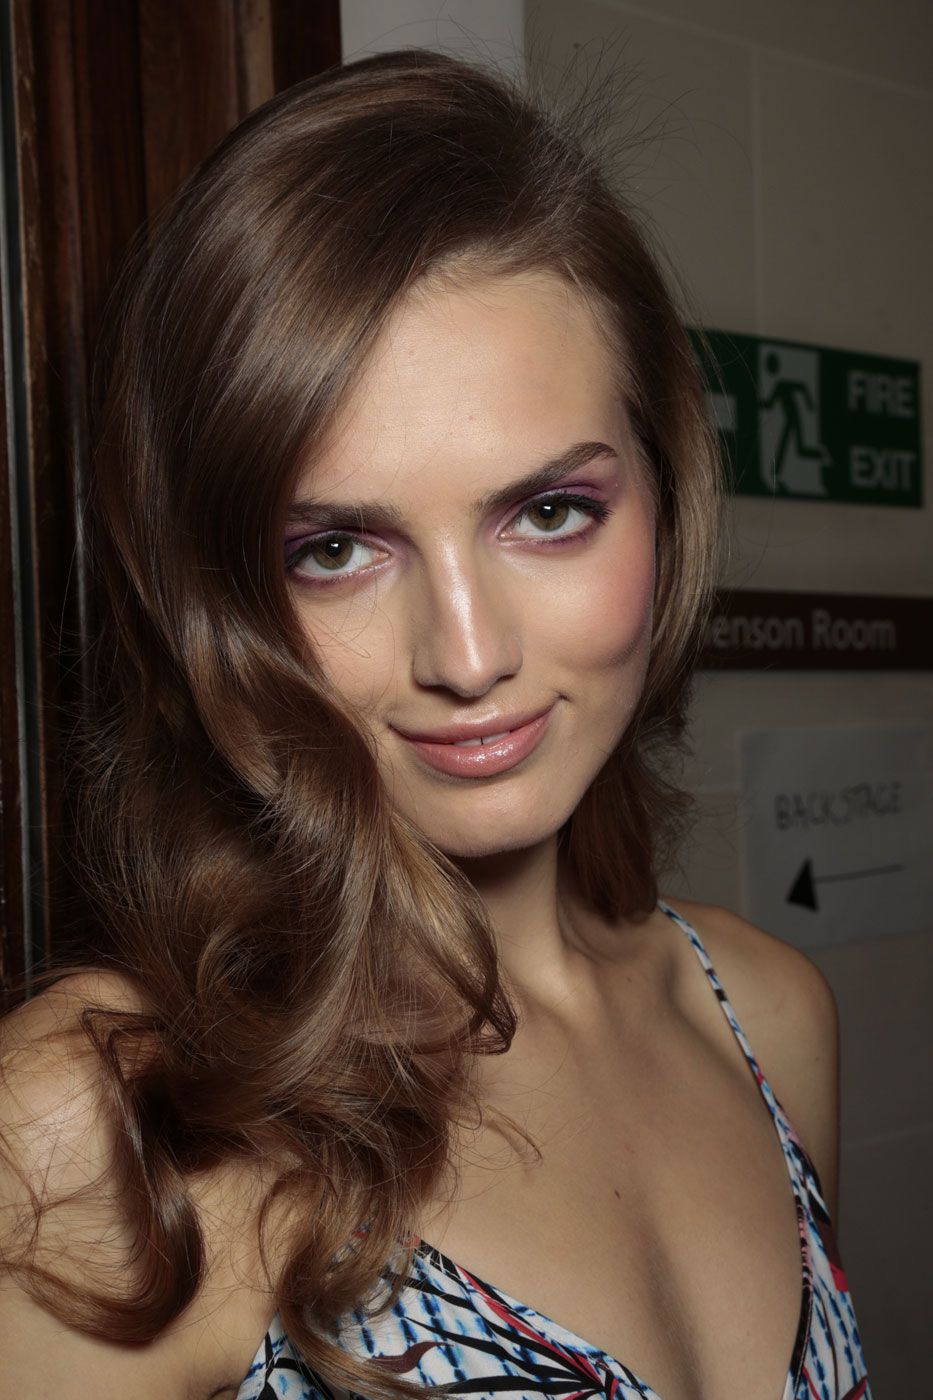 Hairstyle at Matthew Williamson SS15 - Spring/Summer 2015 beauty trends - Cosmopolitan.co.uk